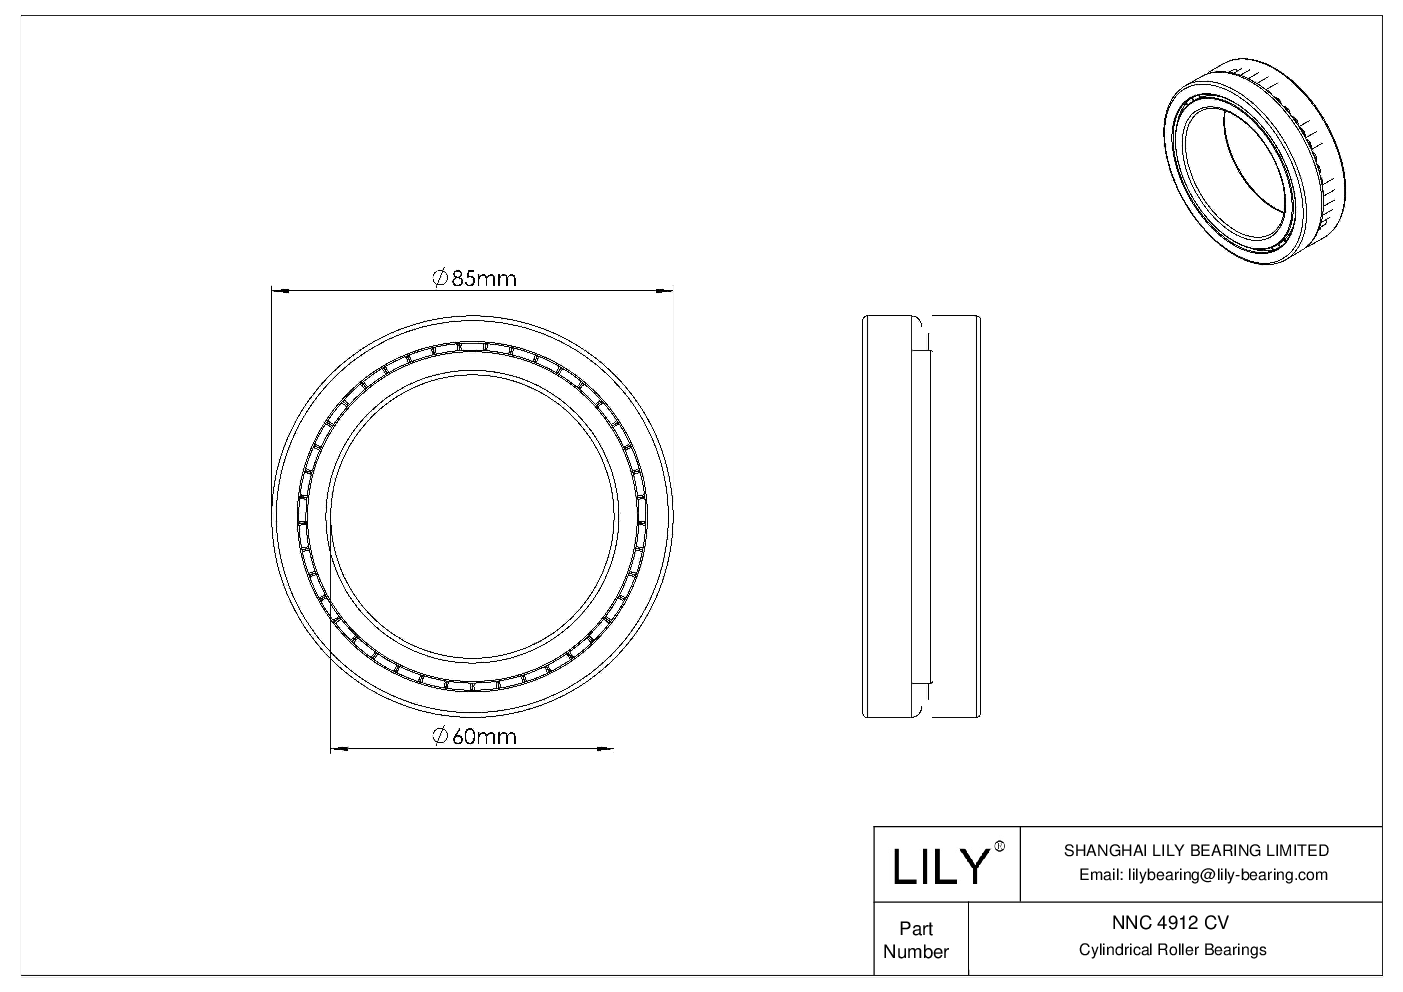 NNC 4912 CV Double Row Full Complement Cylindrical Roller Bearings cad drawing